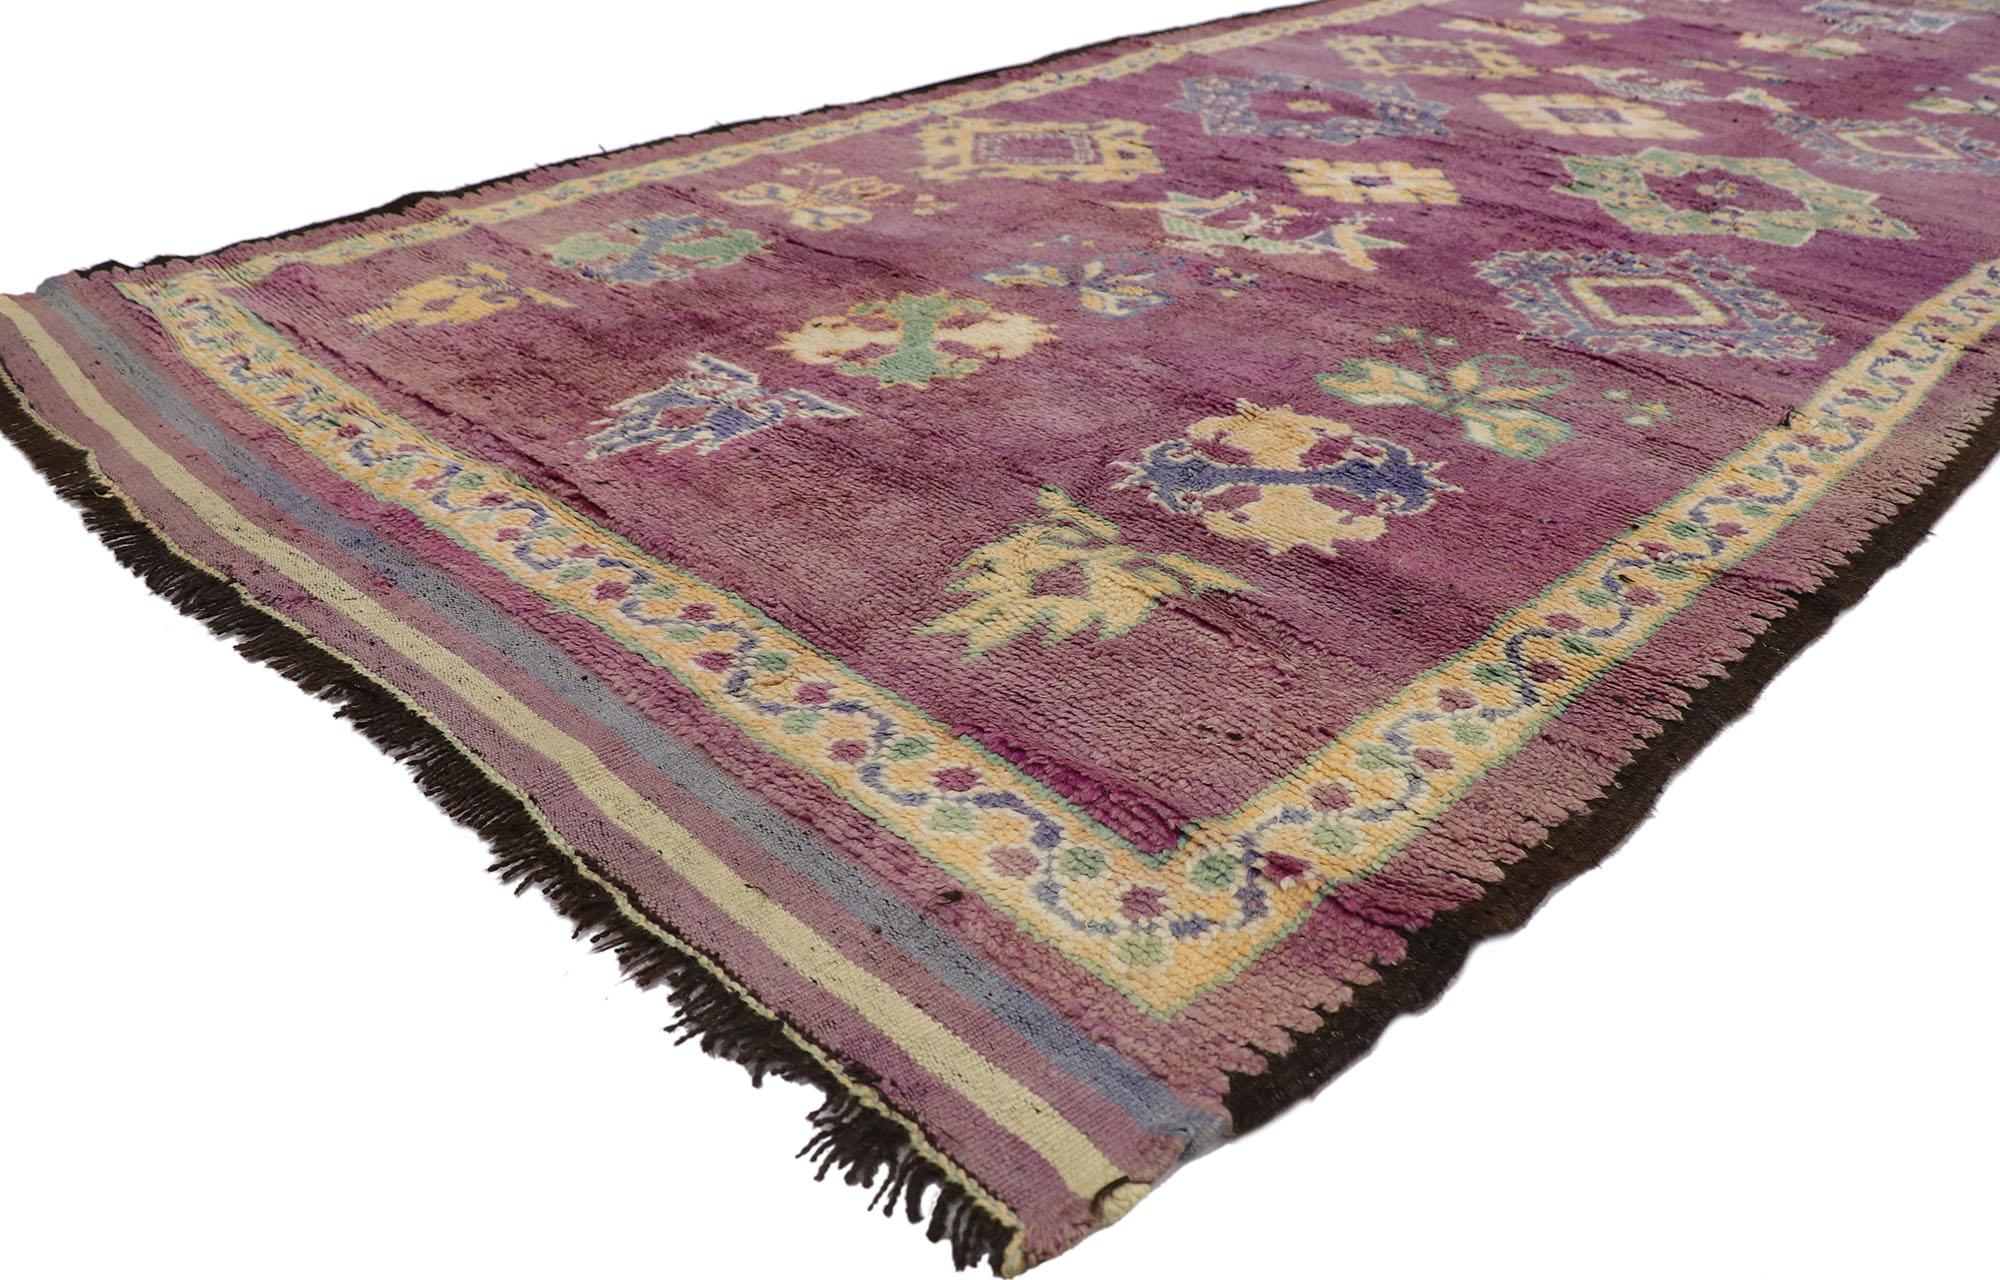 21451 Vintage Berber Purple Boujad Moroccan rug with Boho Chic Tribal Style 05'05 x 11'10. Showcasing an expressive tribal design in soft colors, incredible detail and texture, this hand knotted wool vintage Berber purple Boujad Moroccan rug is a